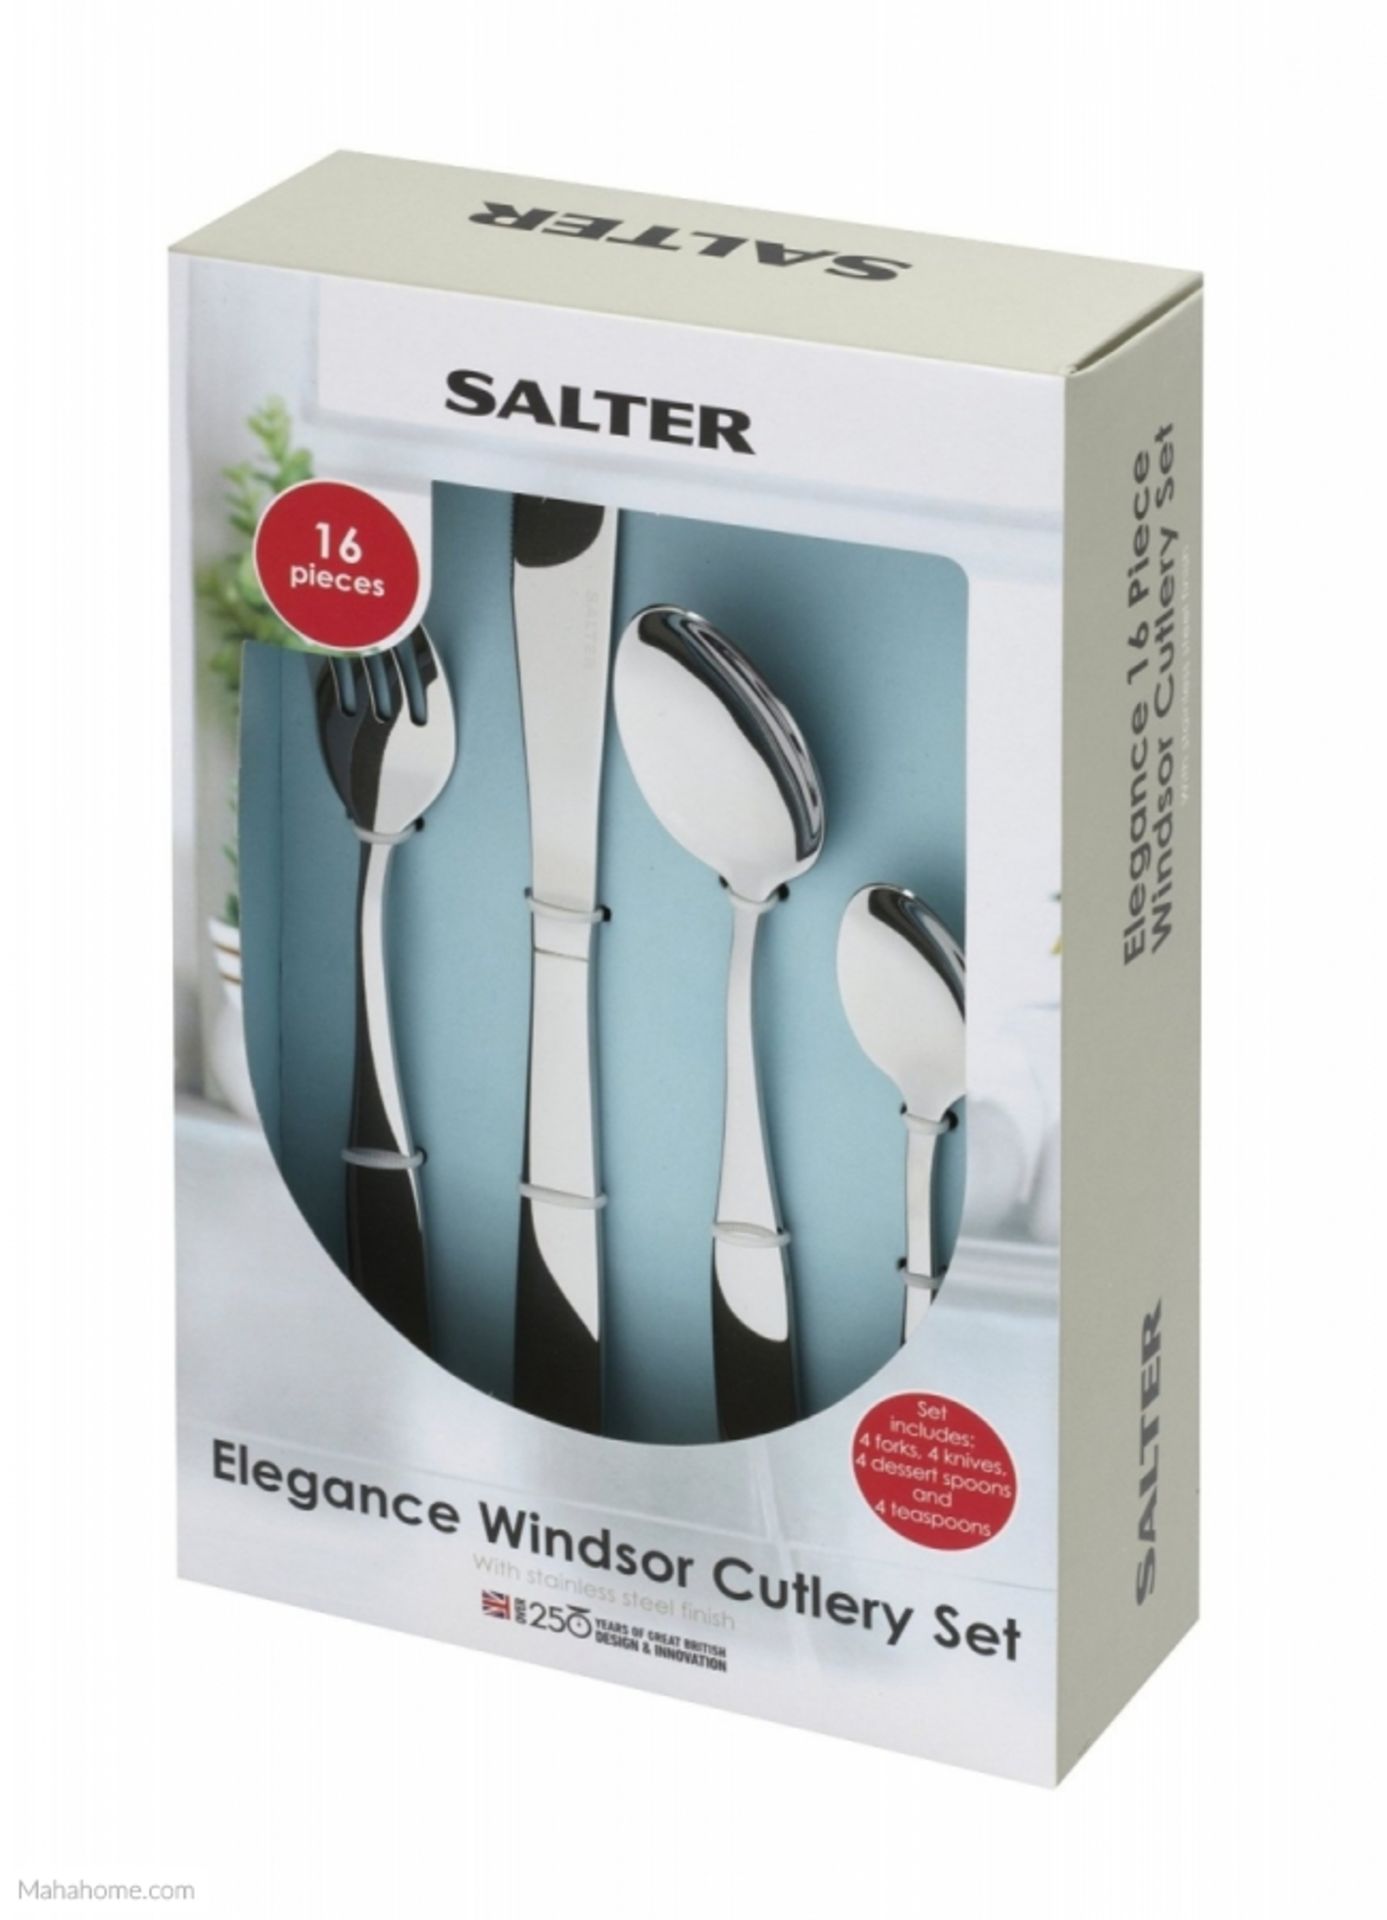 V *TRADE QTY* Brand New Salter 16 Piece Stainless Steel Windsor Cutlery Set - ISP £29.99 (Mahahome.